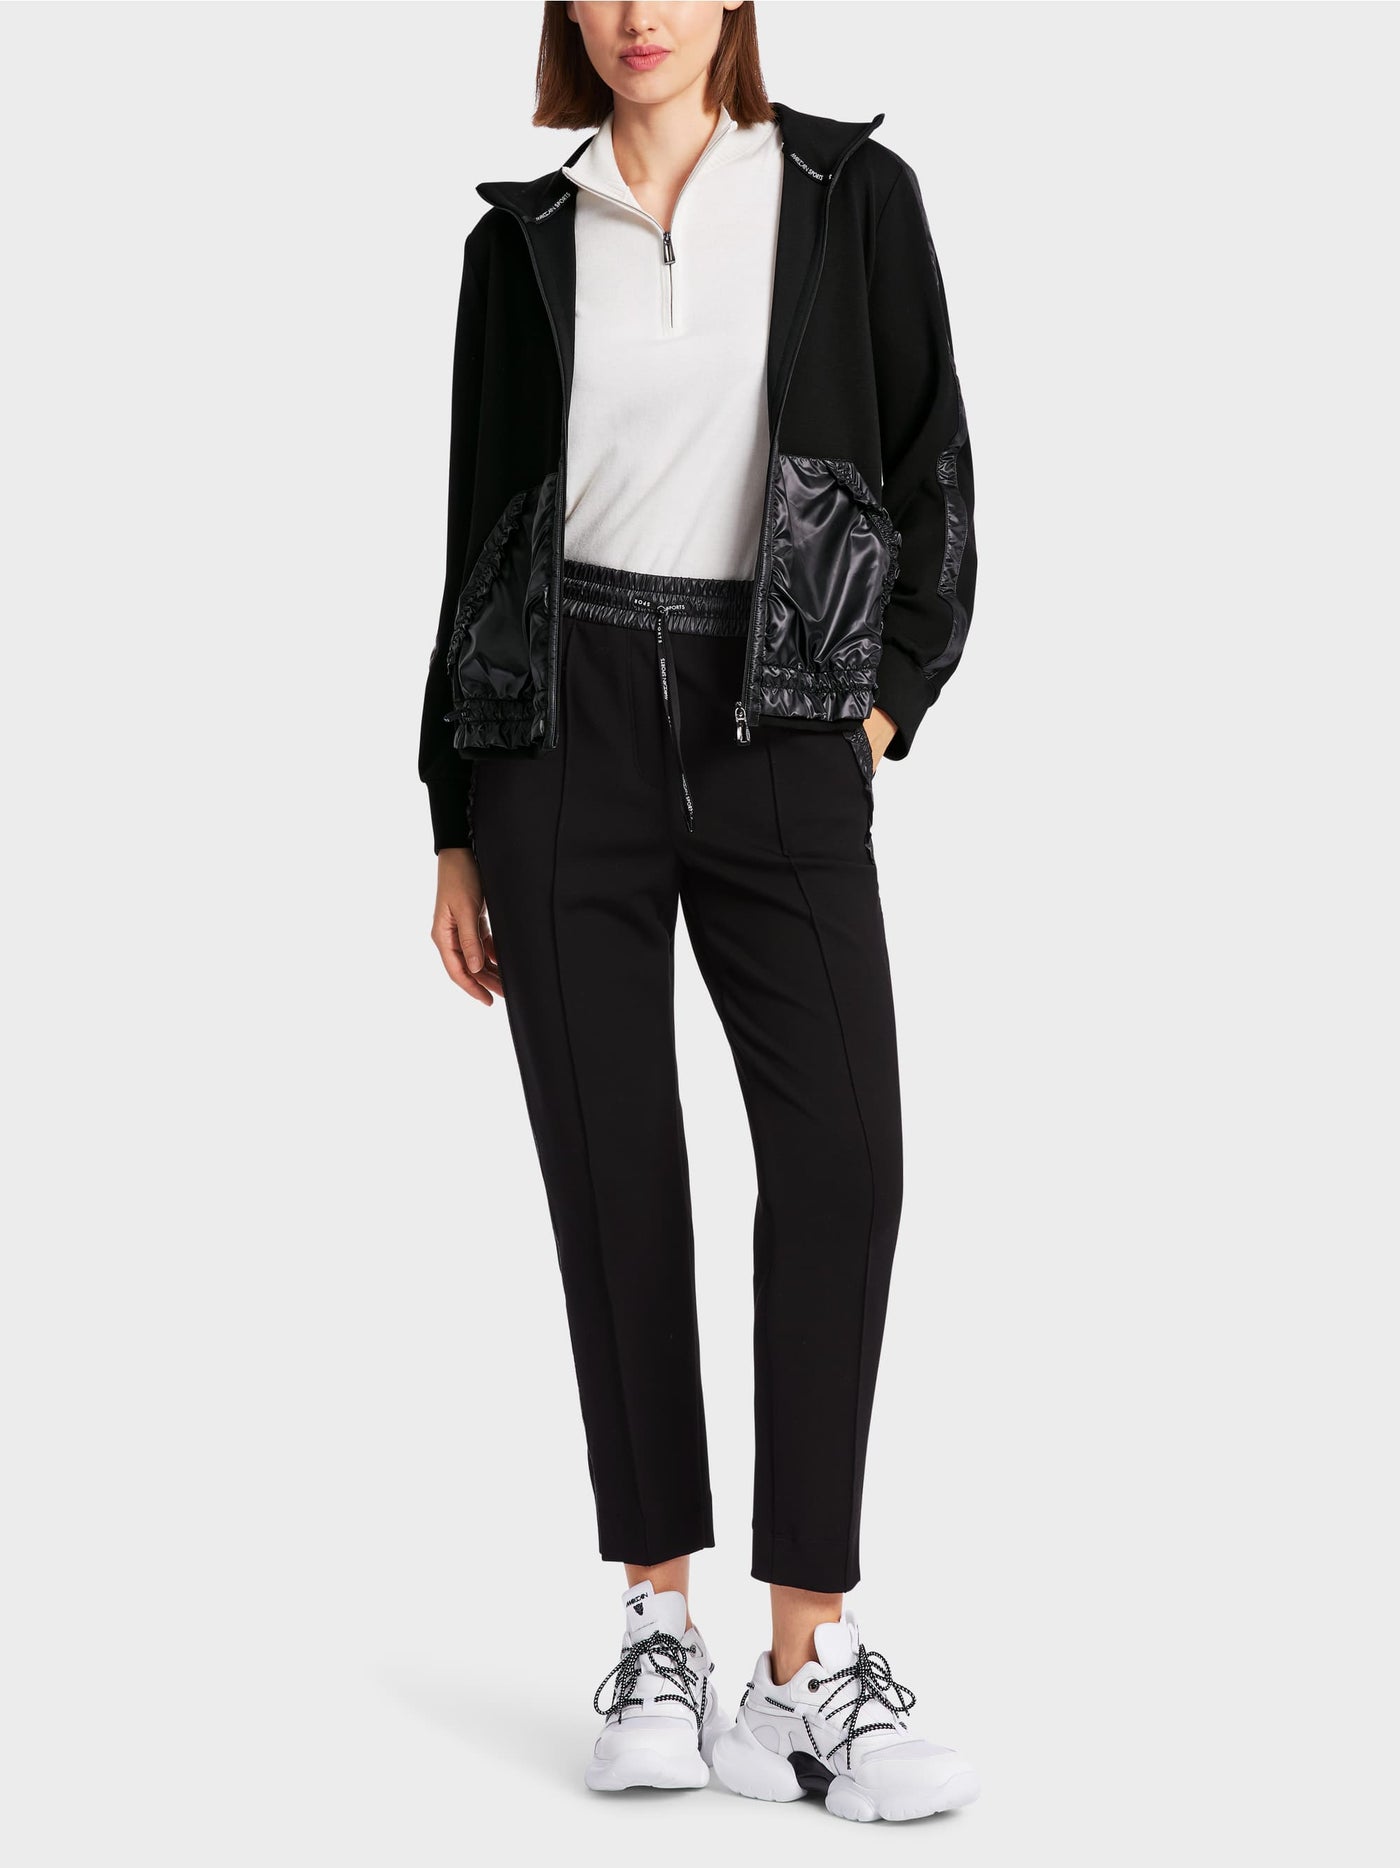 Marc Cain Black Zipped jacket in material mix